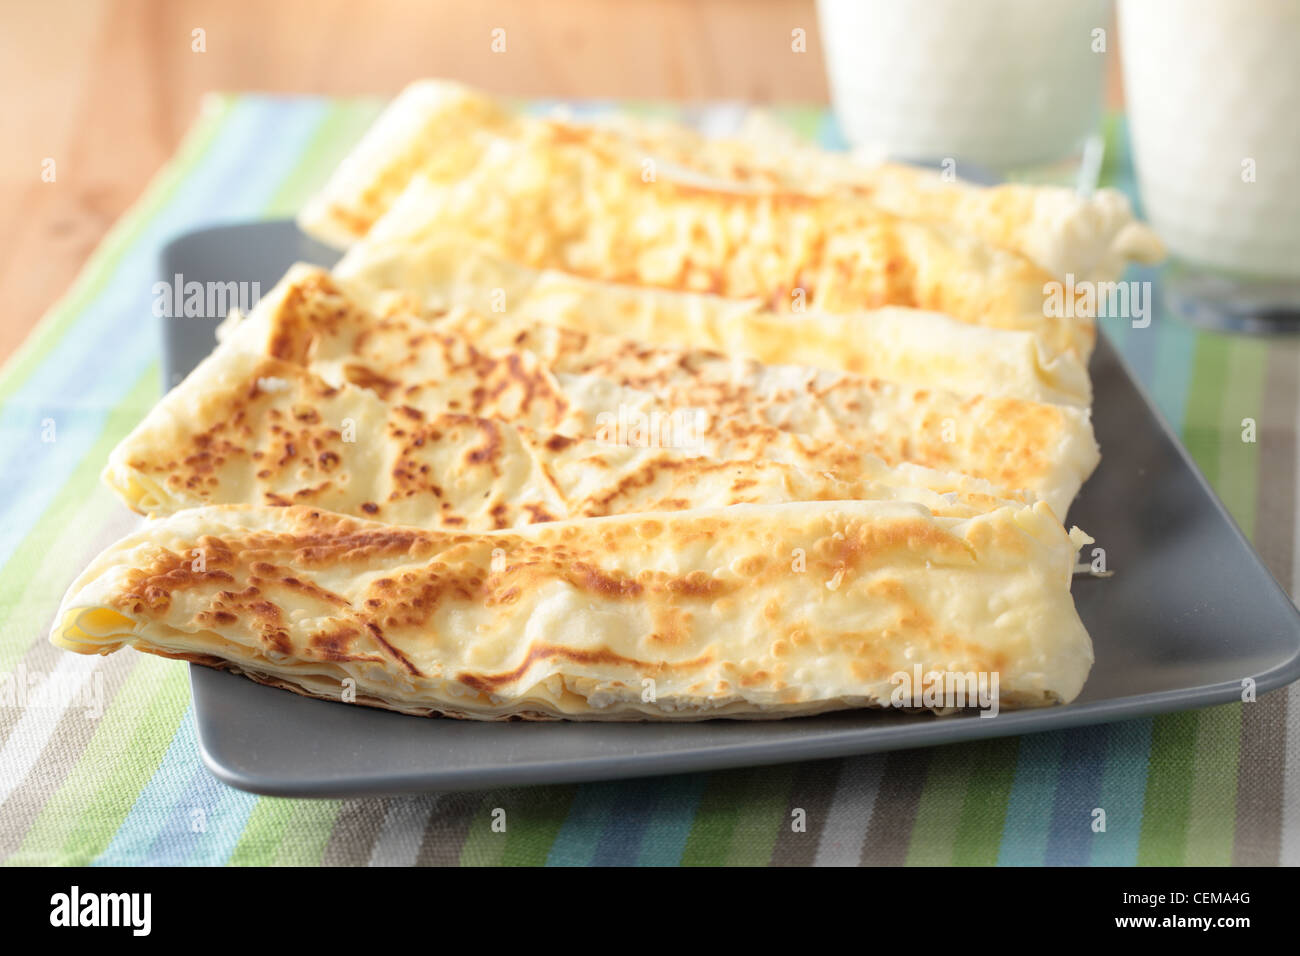 Slices of gozleme with cheese on a plate Stock Photo